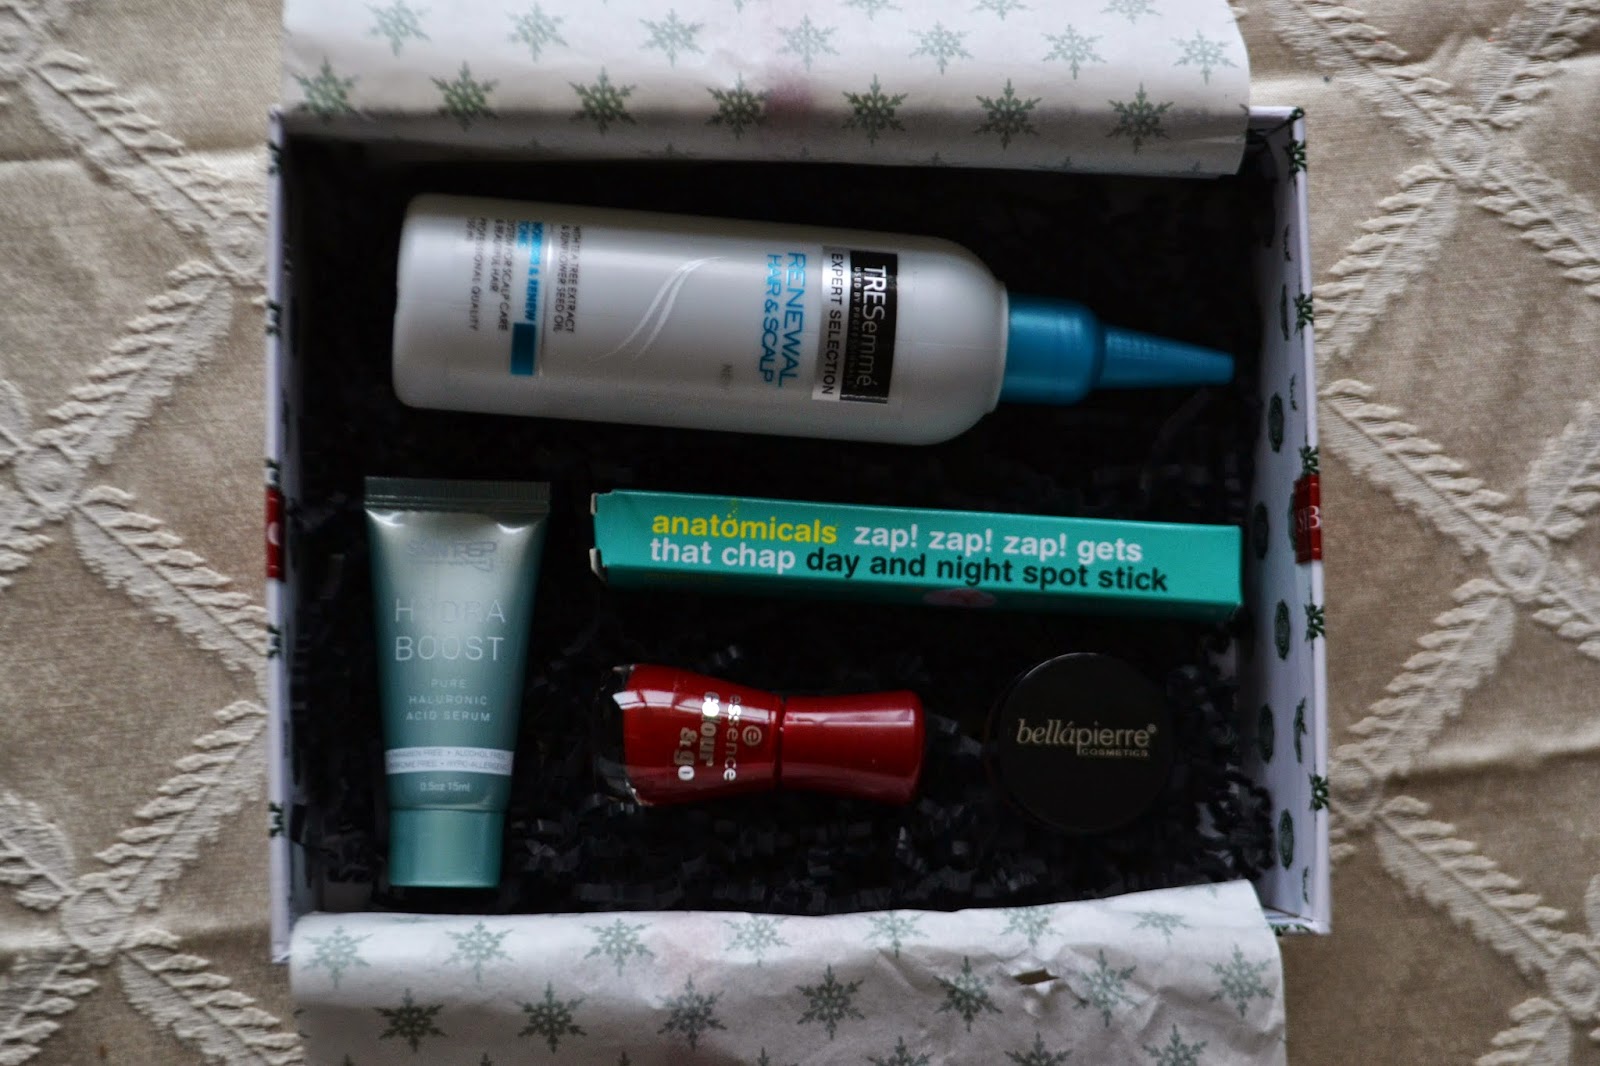 opening the december glossybox to see the products inside